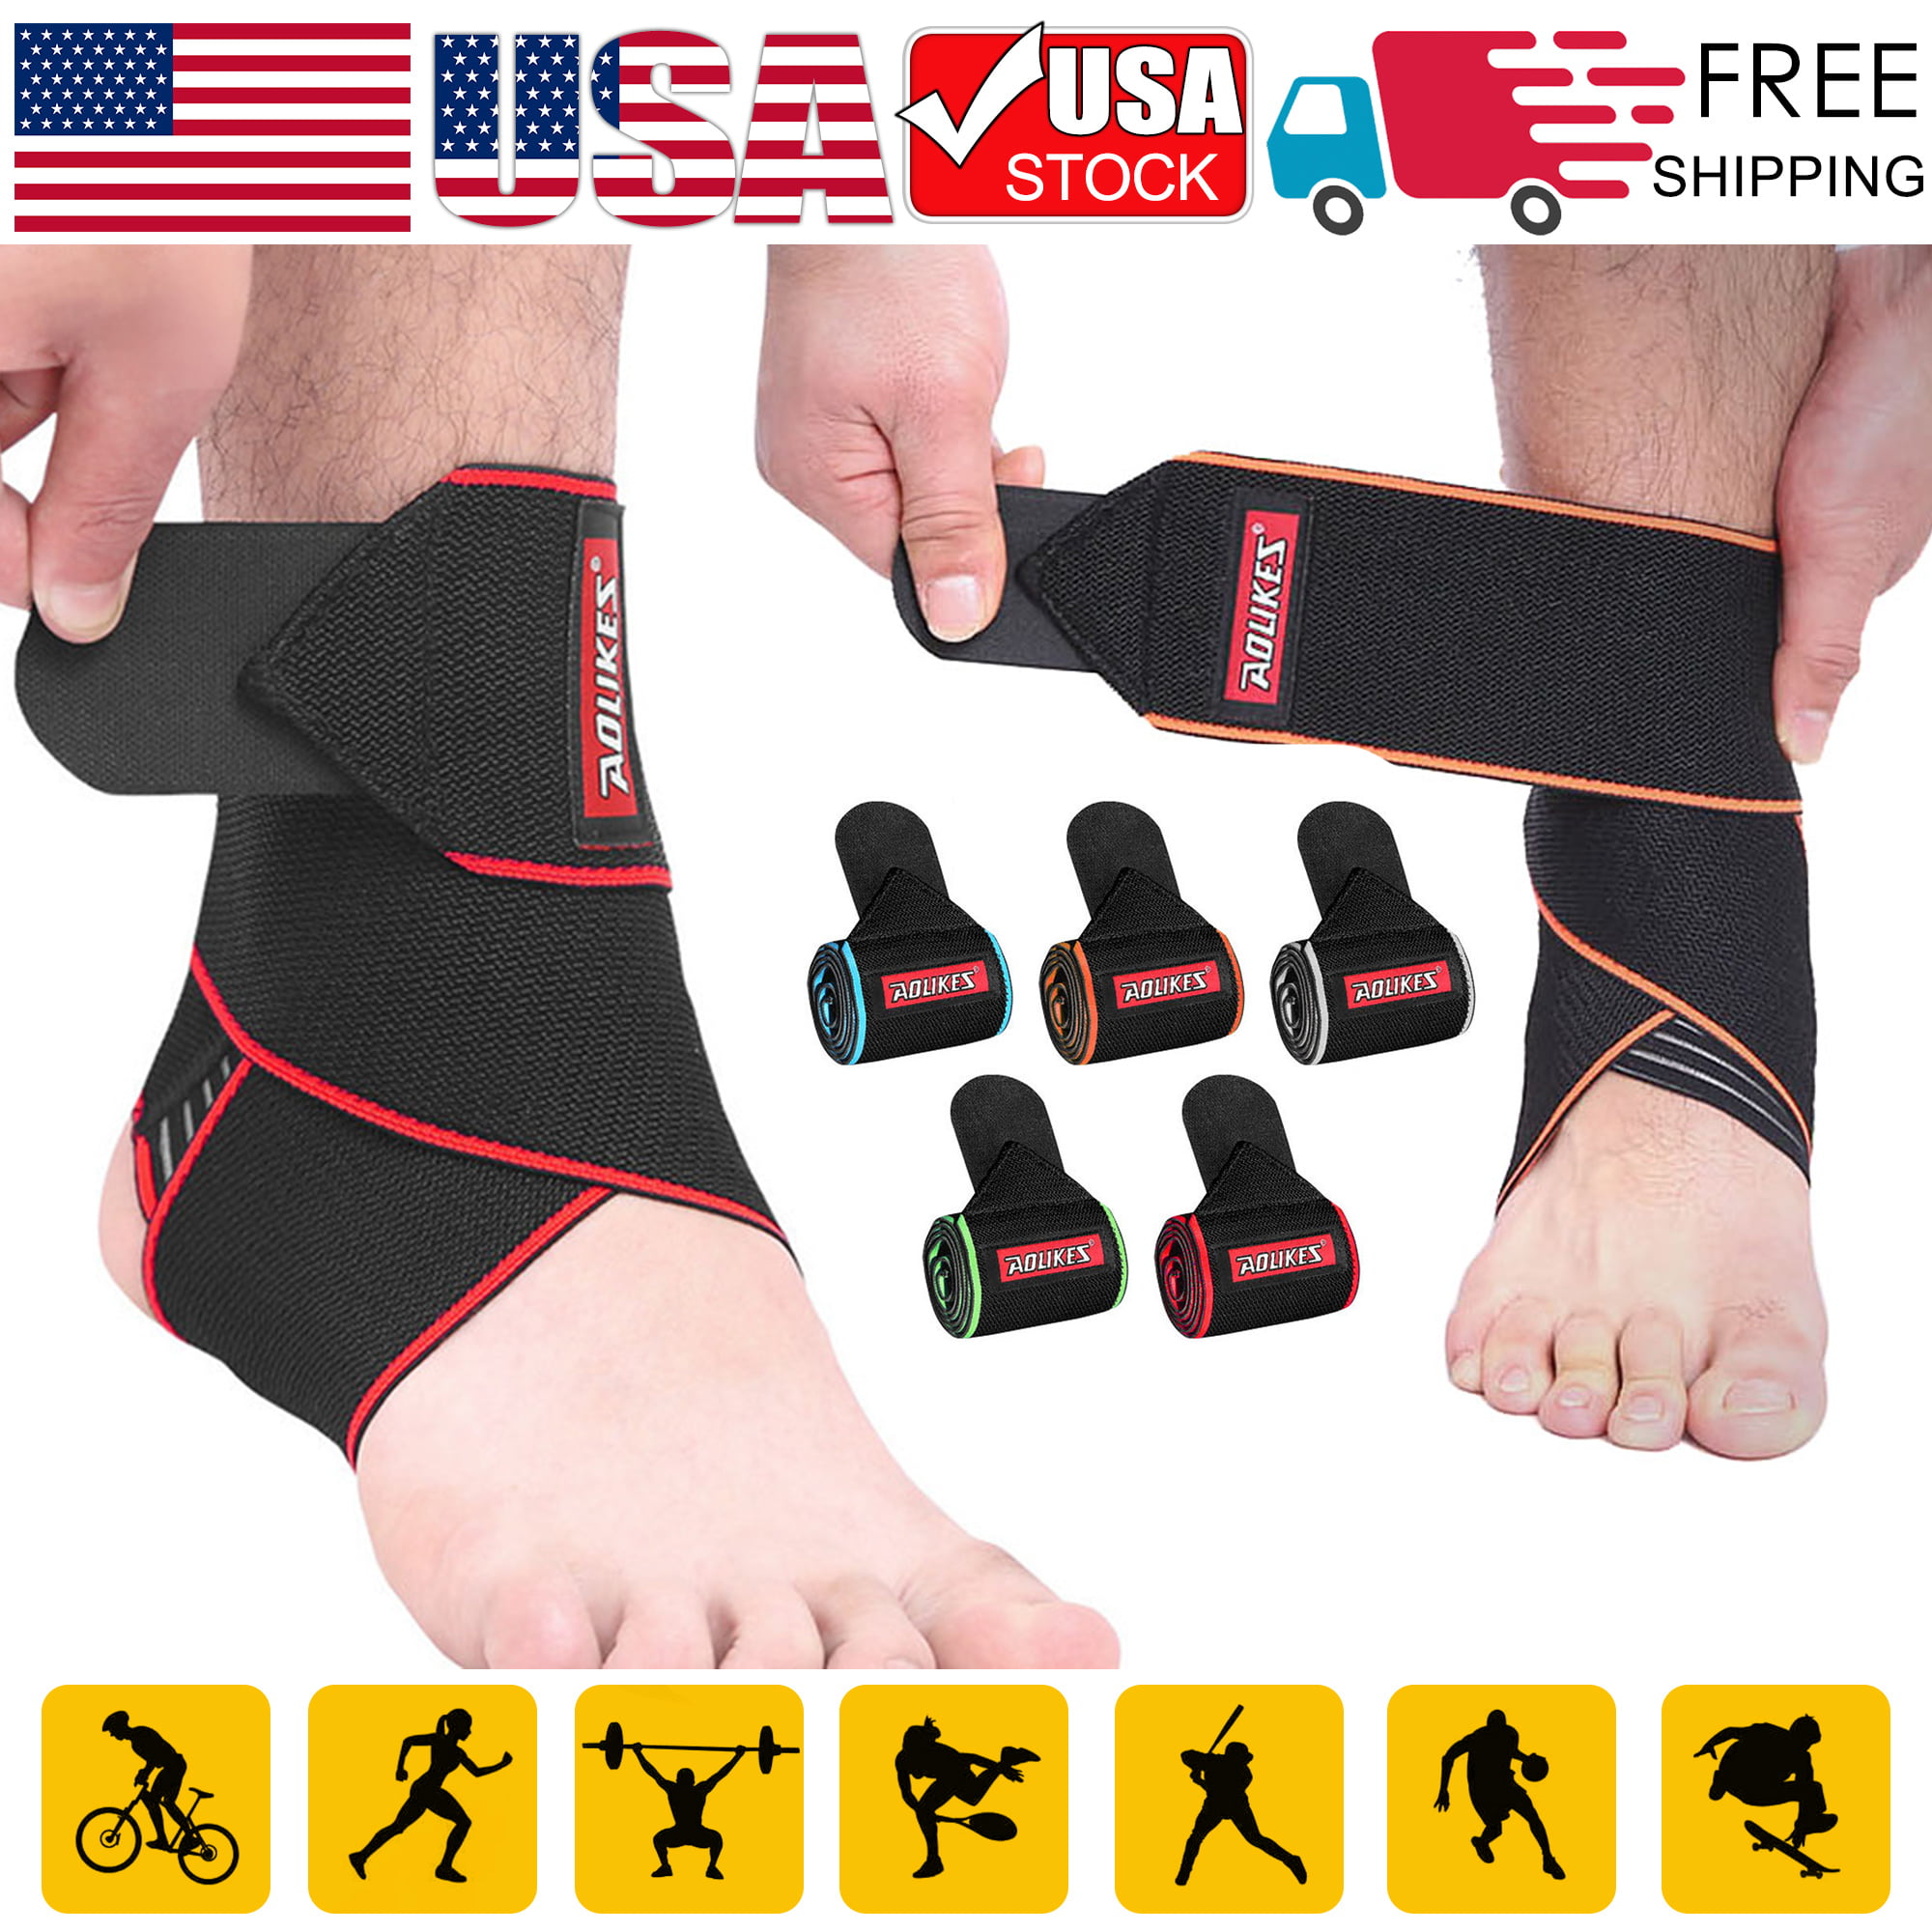 Details about   2pcs Exercise Elastic Ankle Brace Support Band or Sport Gym Protects Therapy v 